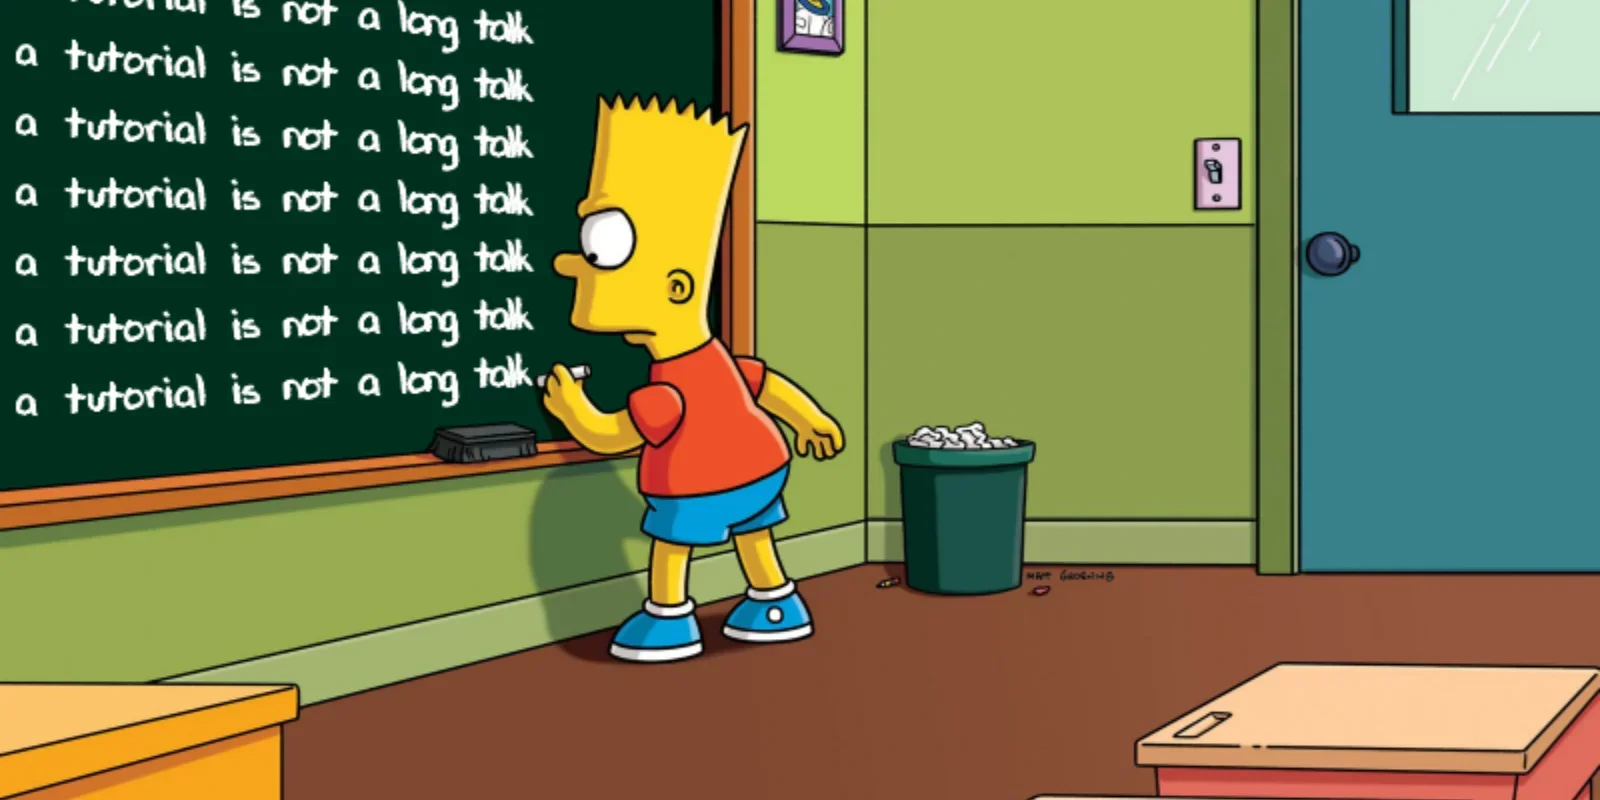 A meme that shows Bart Simpson at detention in school, writing the sentence "a tutorial is not a long talk" on a chalkboard repeatedly.